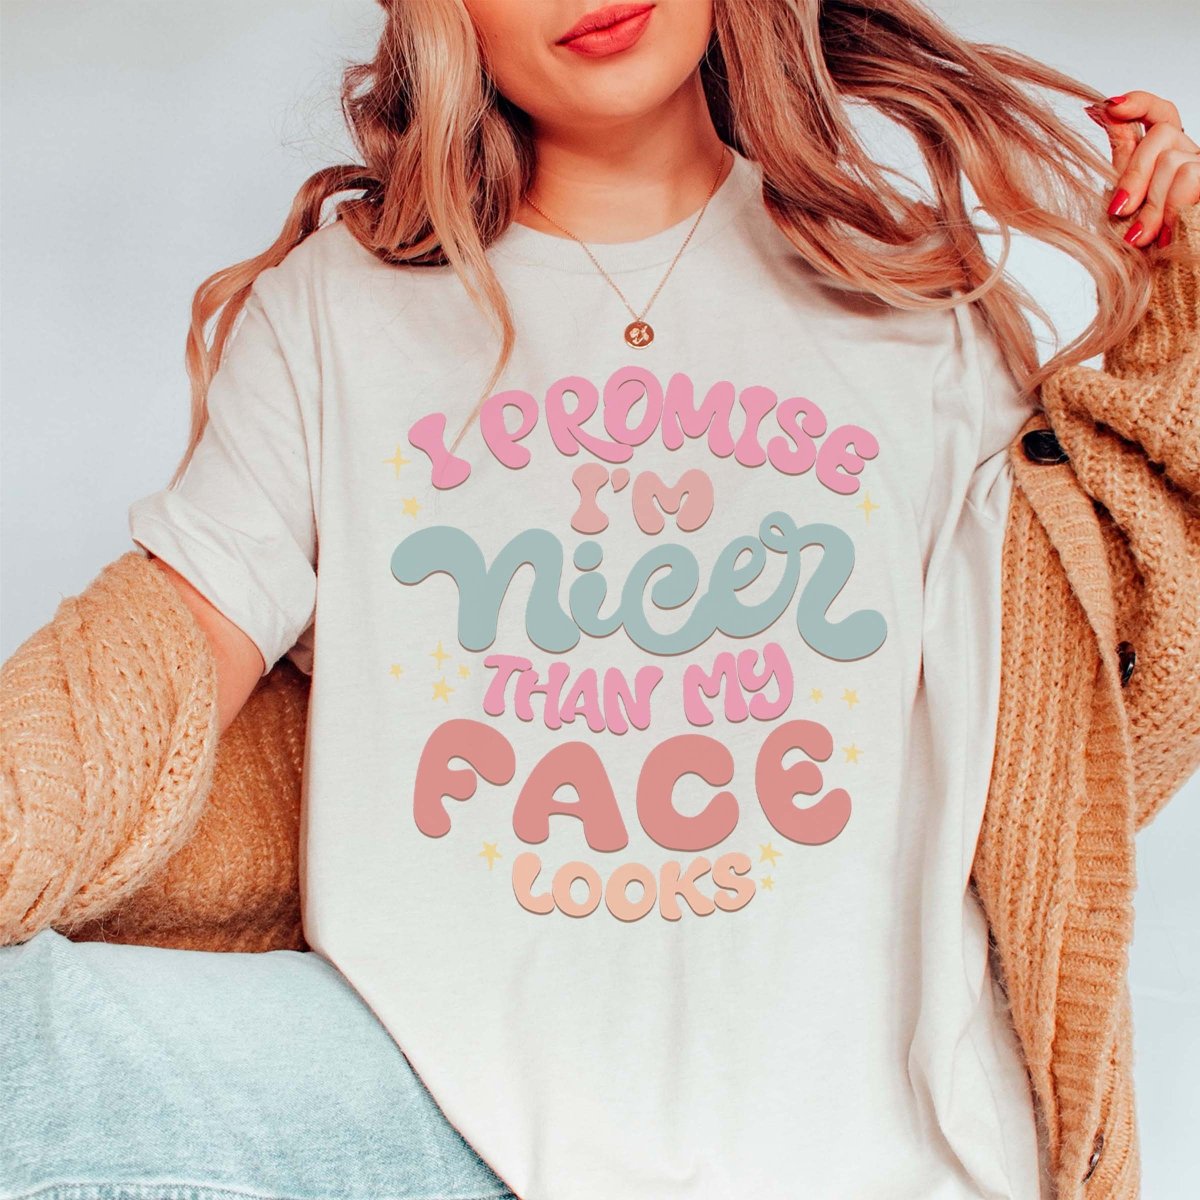 Nicer than my face looks tee - Limeberry Designs